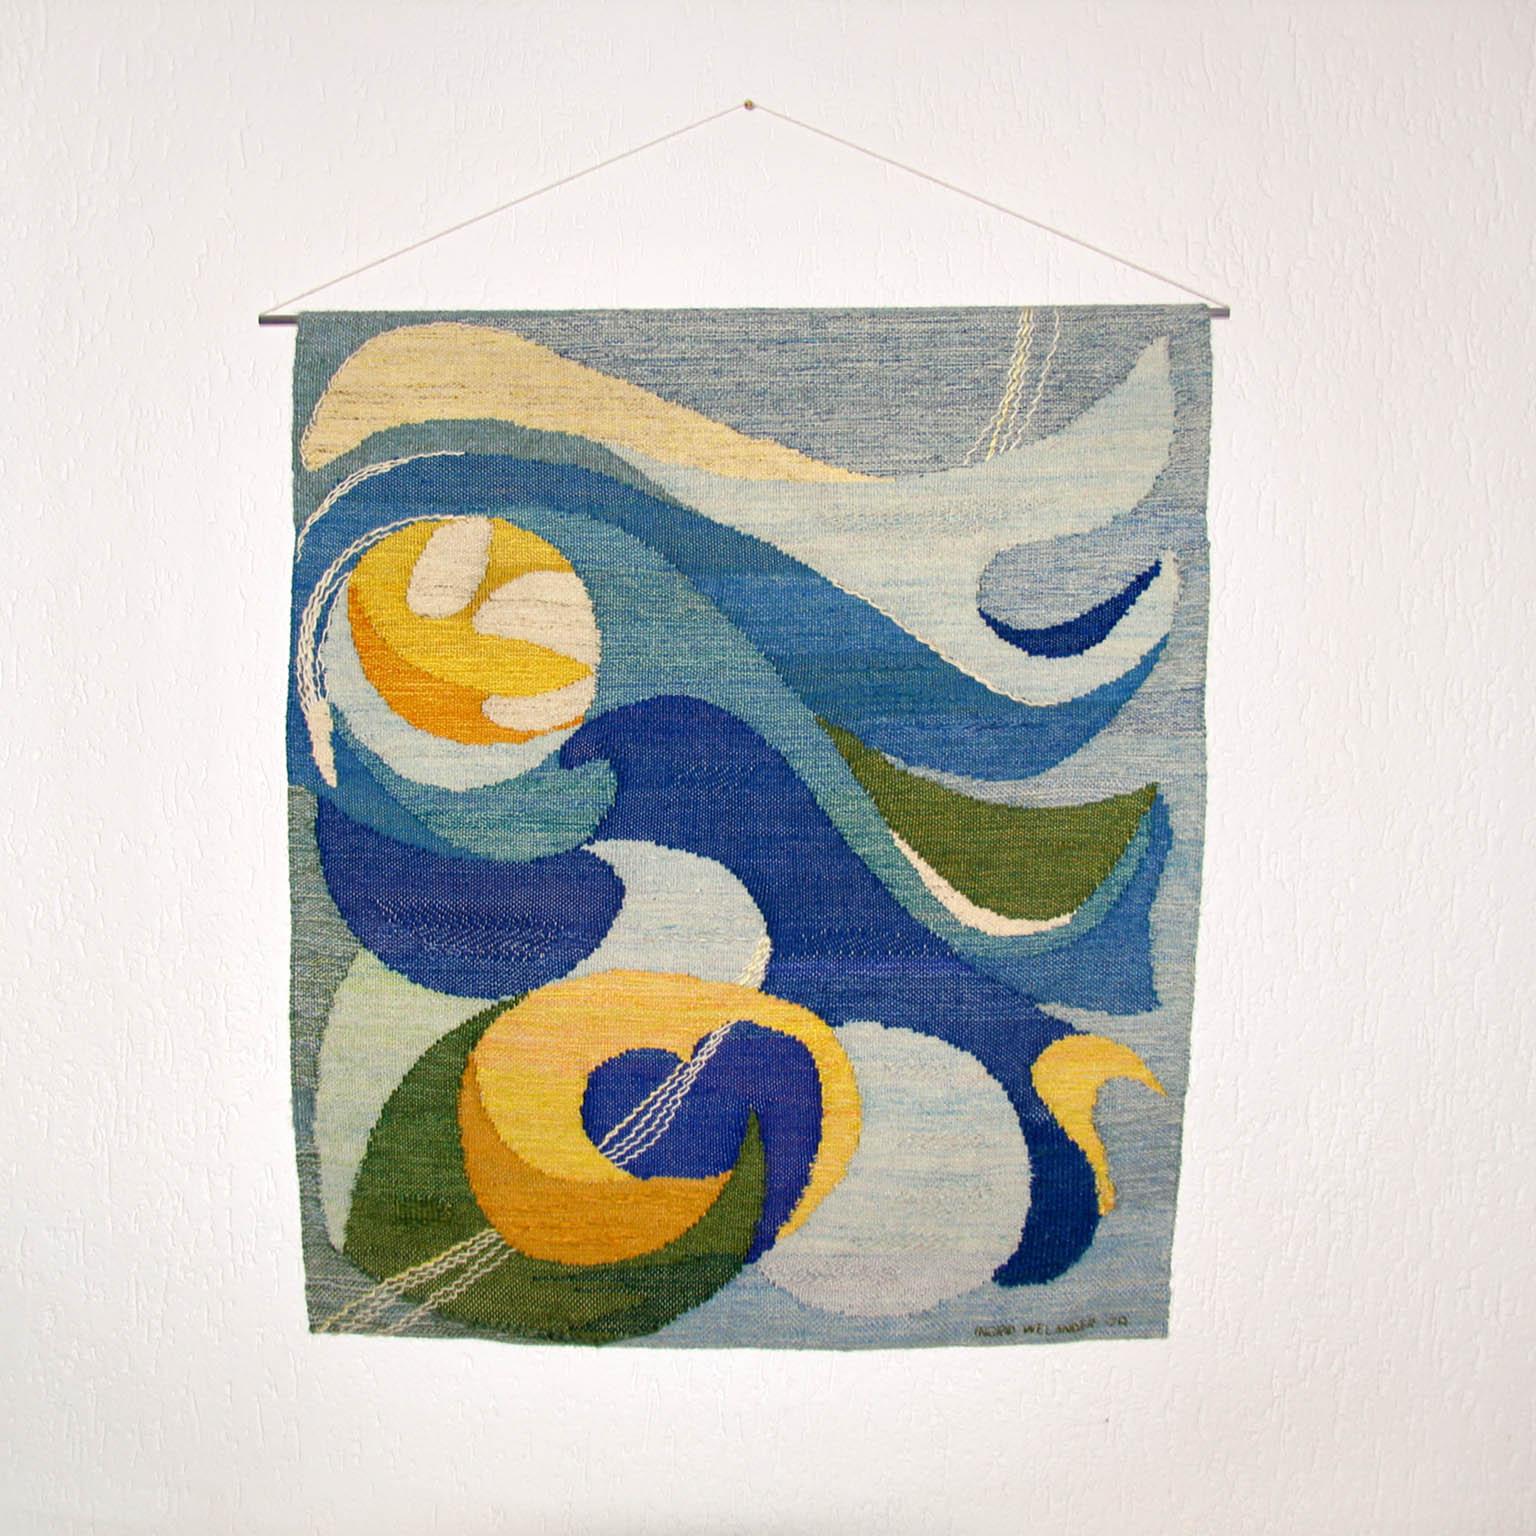 Important, unique piece handwoven Scandinavian vintage tapestry from 1979 by Ingrid Hjelmvik Welander.
Signed lower right and to the backside written in Swedish (English translation)
Do you see the sea? Do you hear the wind? Hear the air playing.